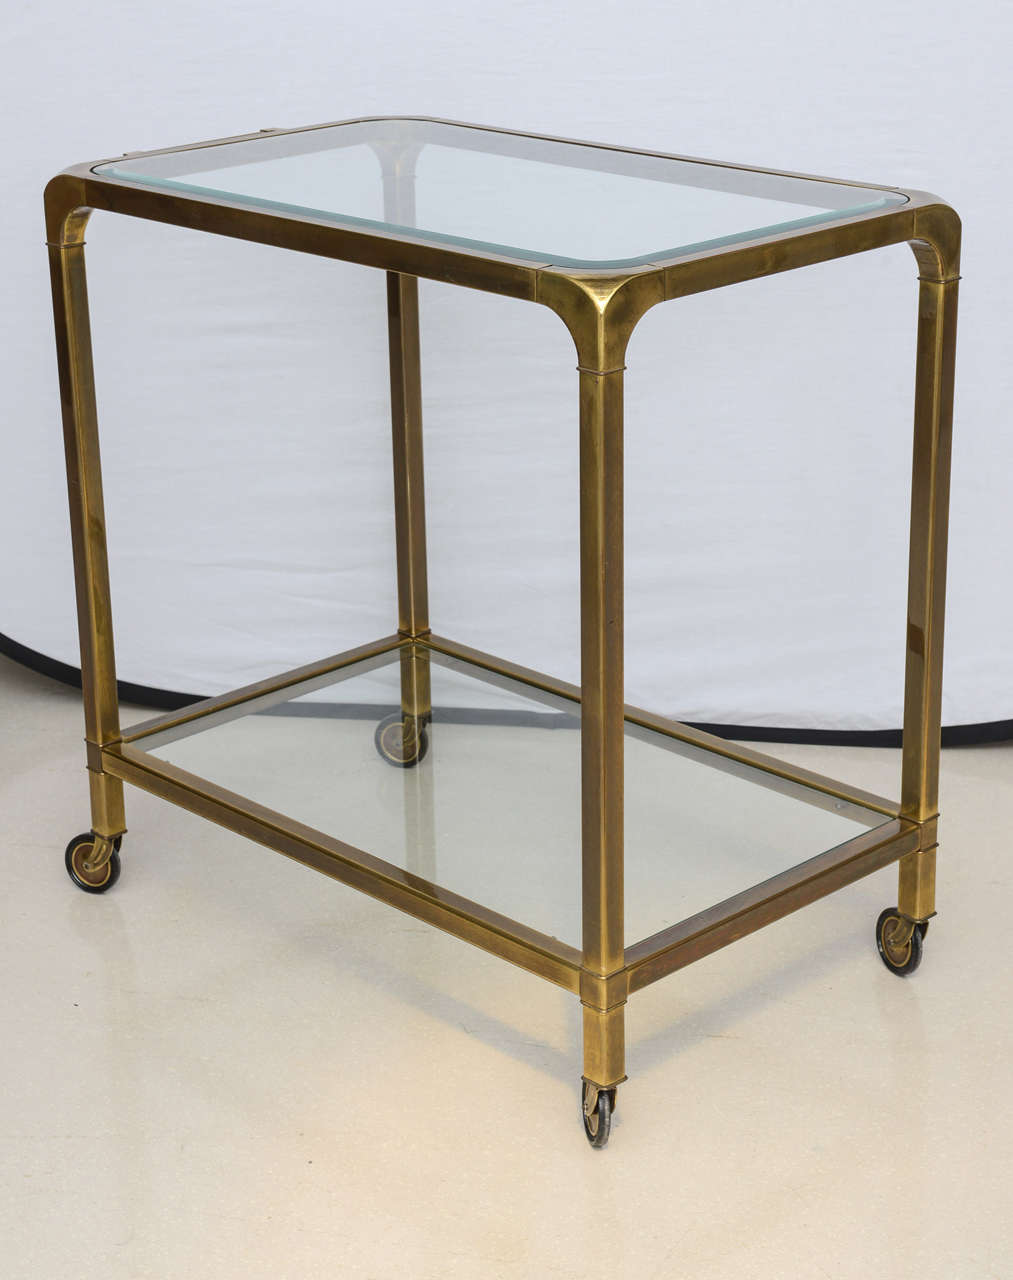 Brass Mastercraft trolley with two glass shelves.